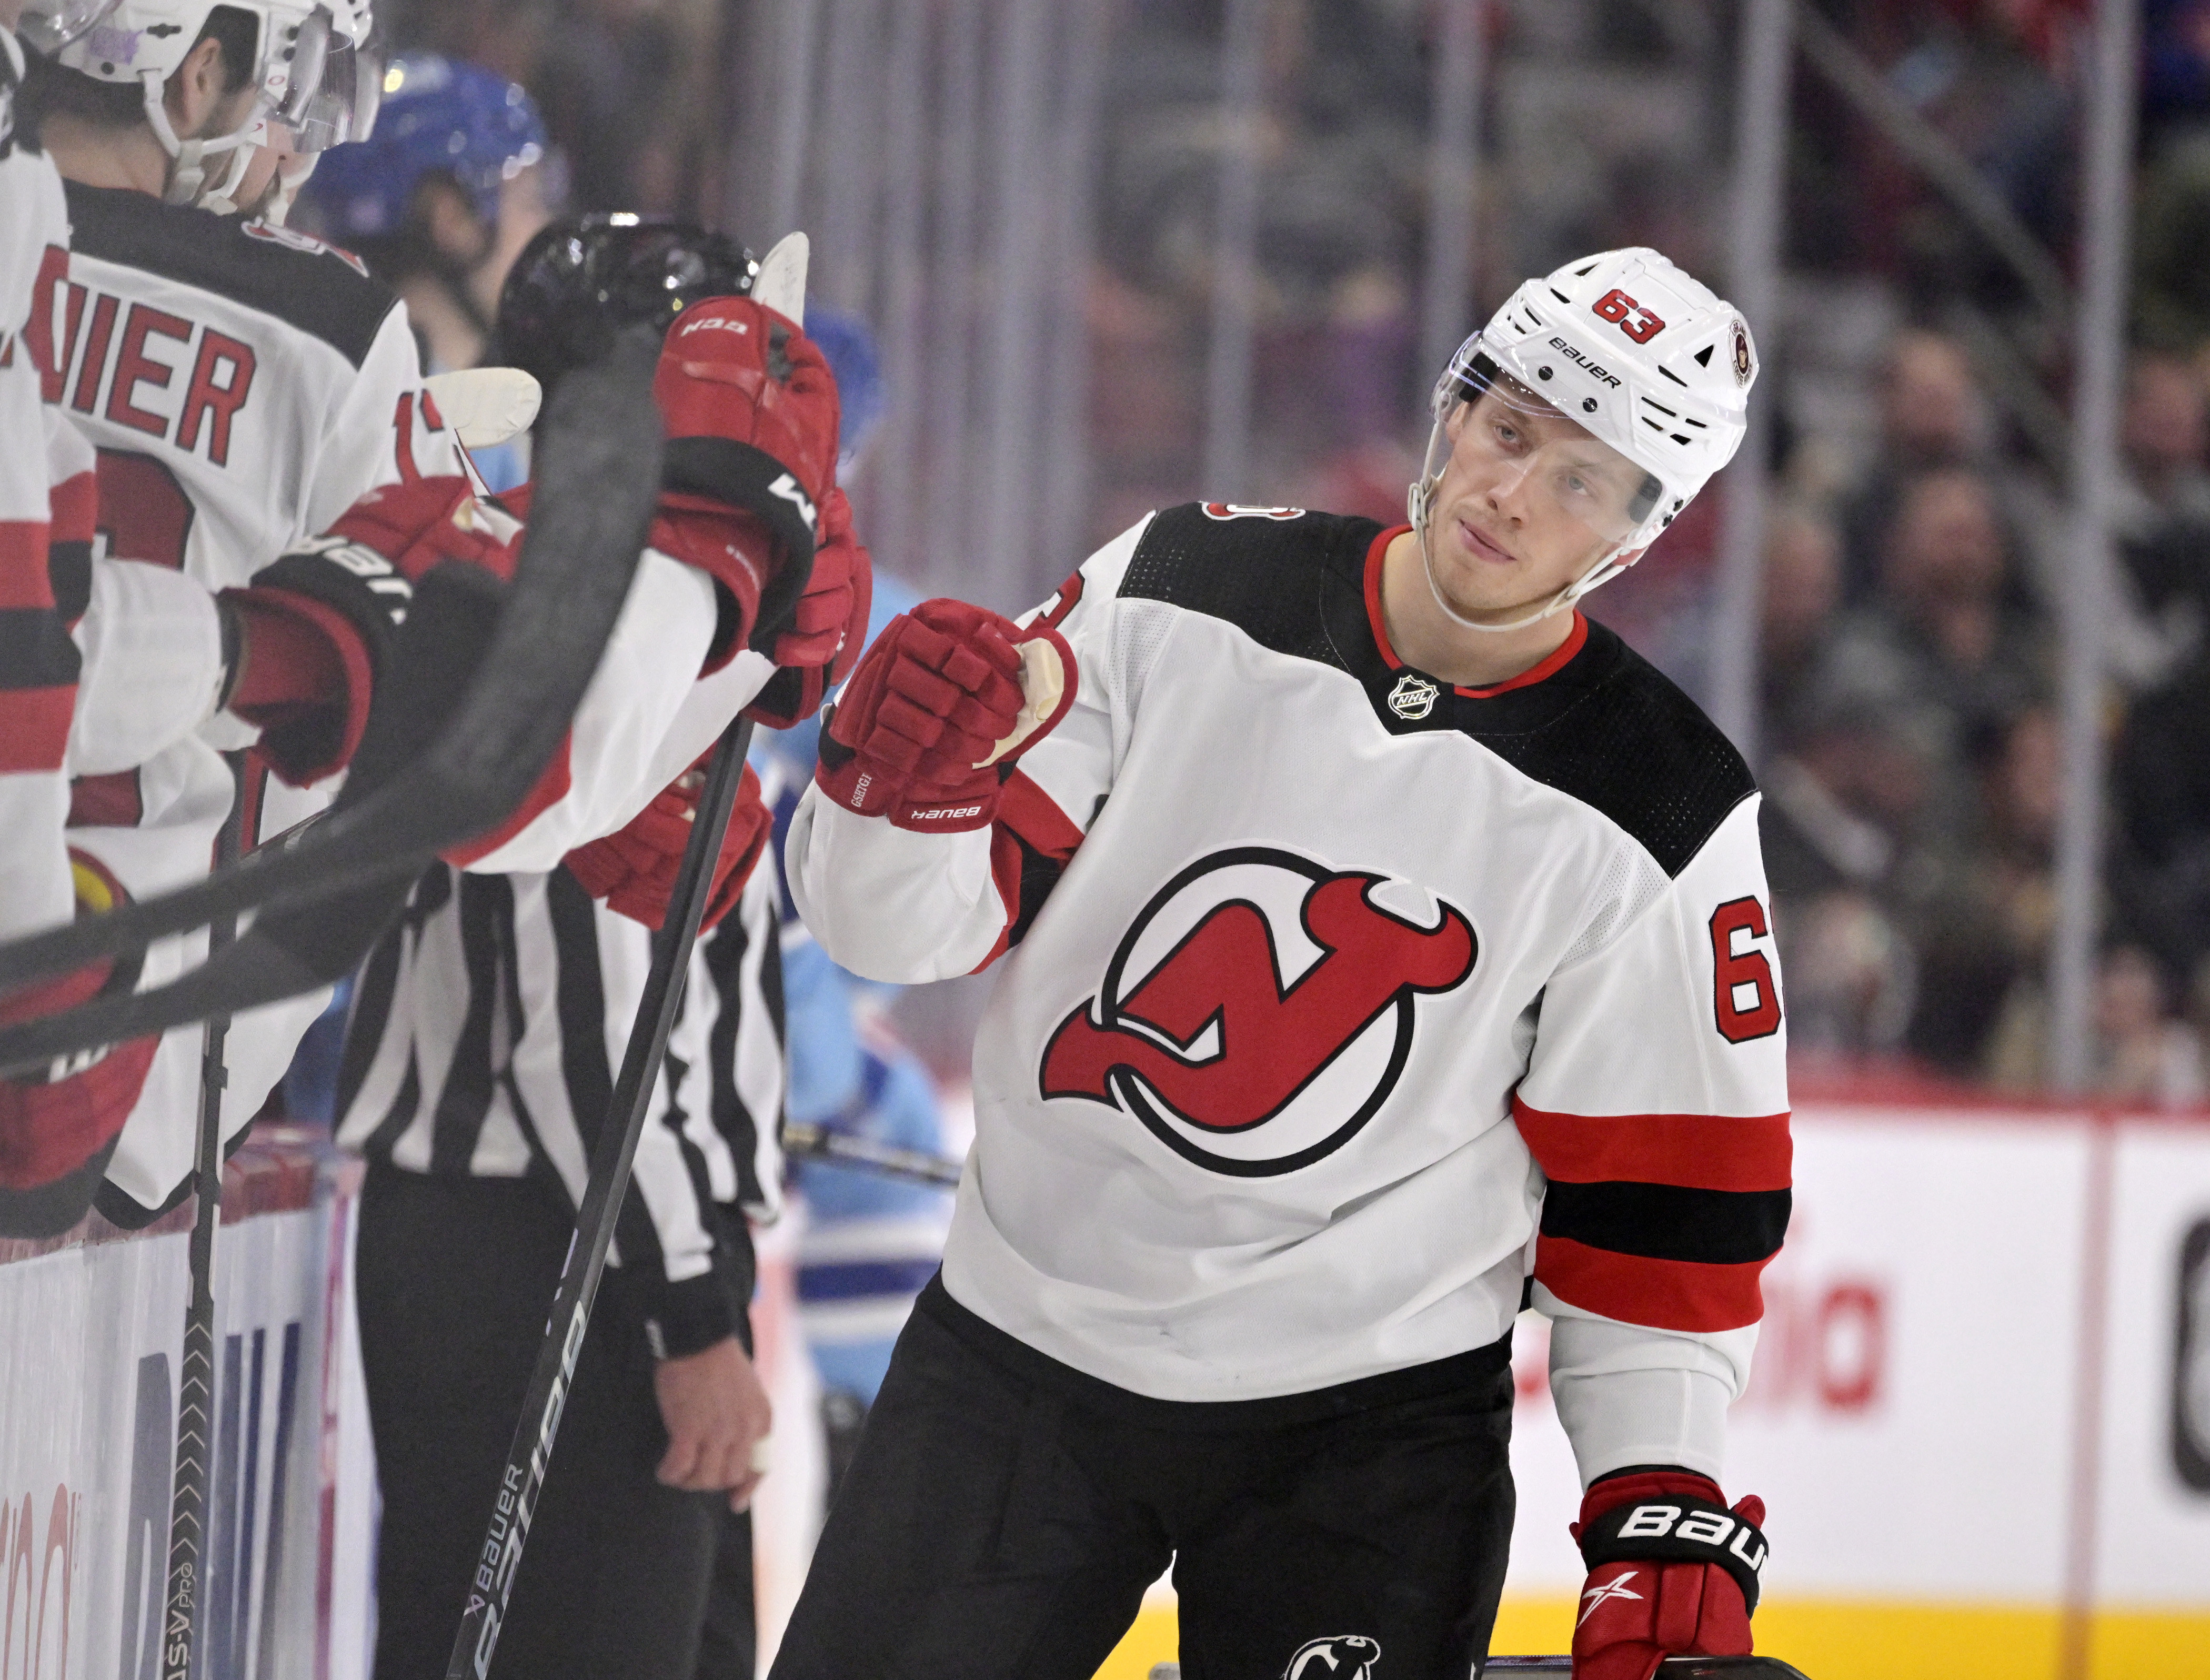 Montreal Canadiens lose 5-1 to New Jersey Devils